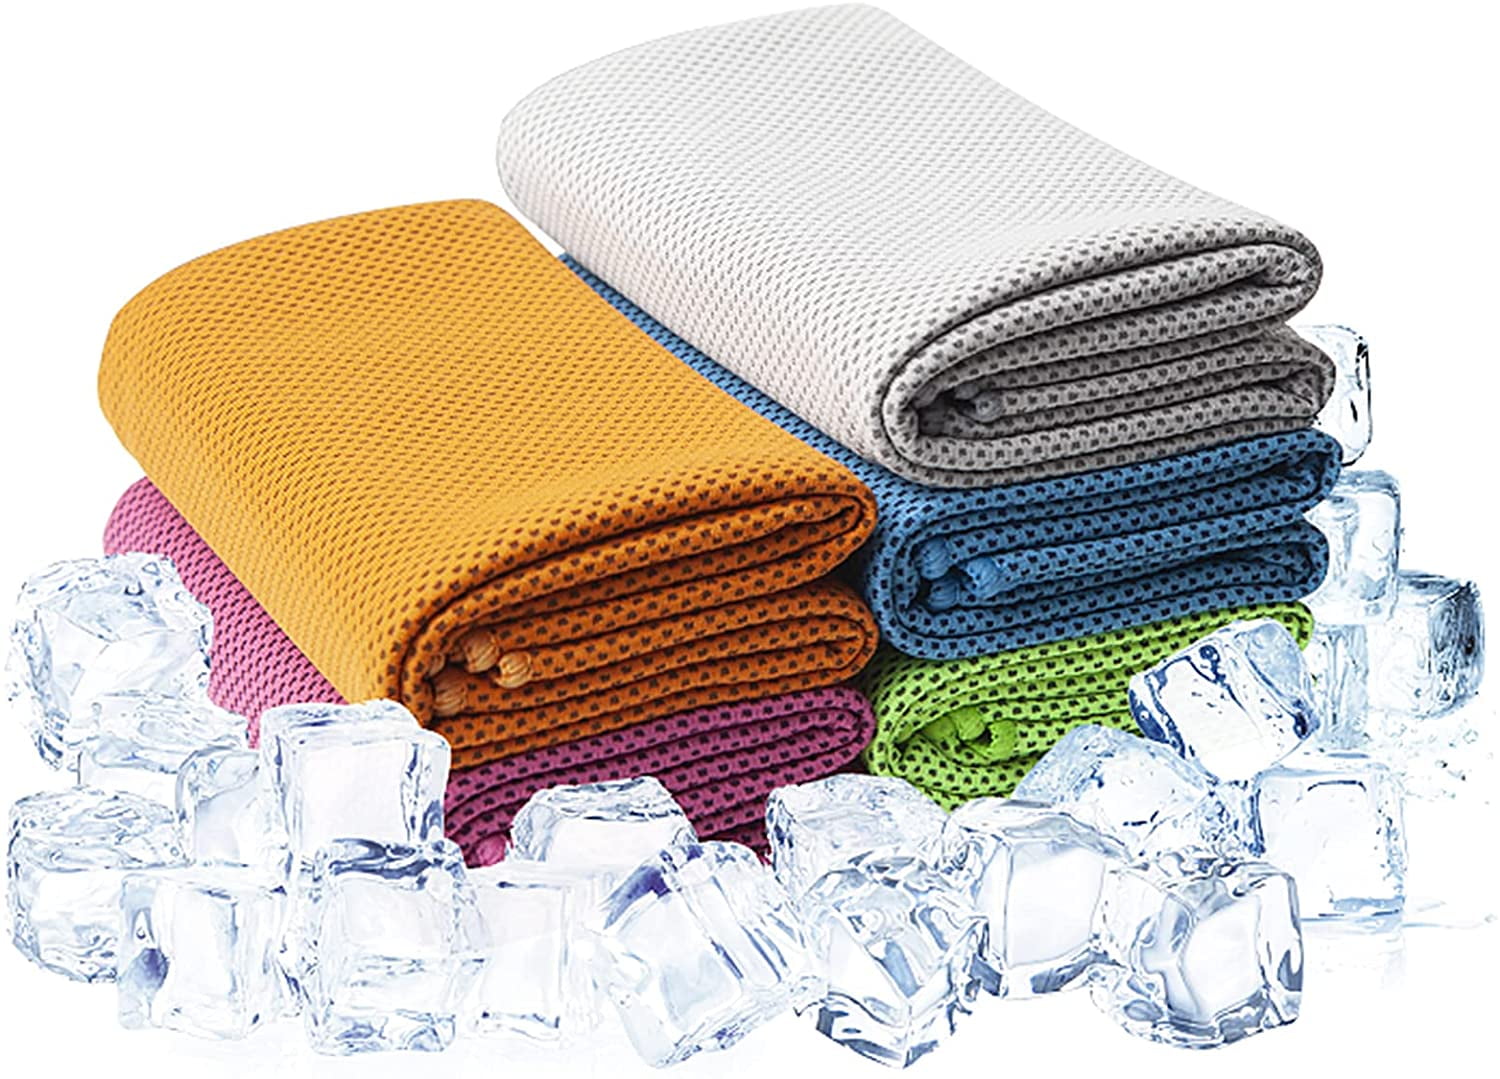 40x 12 ,Ice Towel,Microfiber Towel,Soft Breathable Chilly Towel for Yoga,Sport,Gym,Workout,Camping,Fitness,Running,Workout&More Activities 4 Packs Cooling Towel 